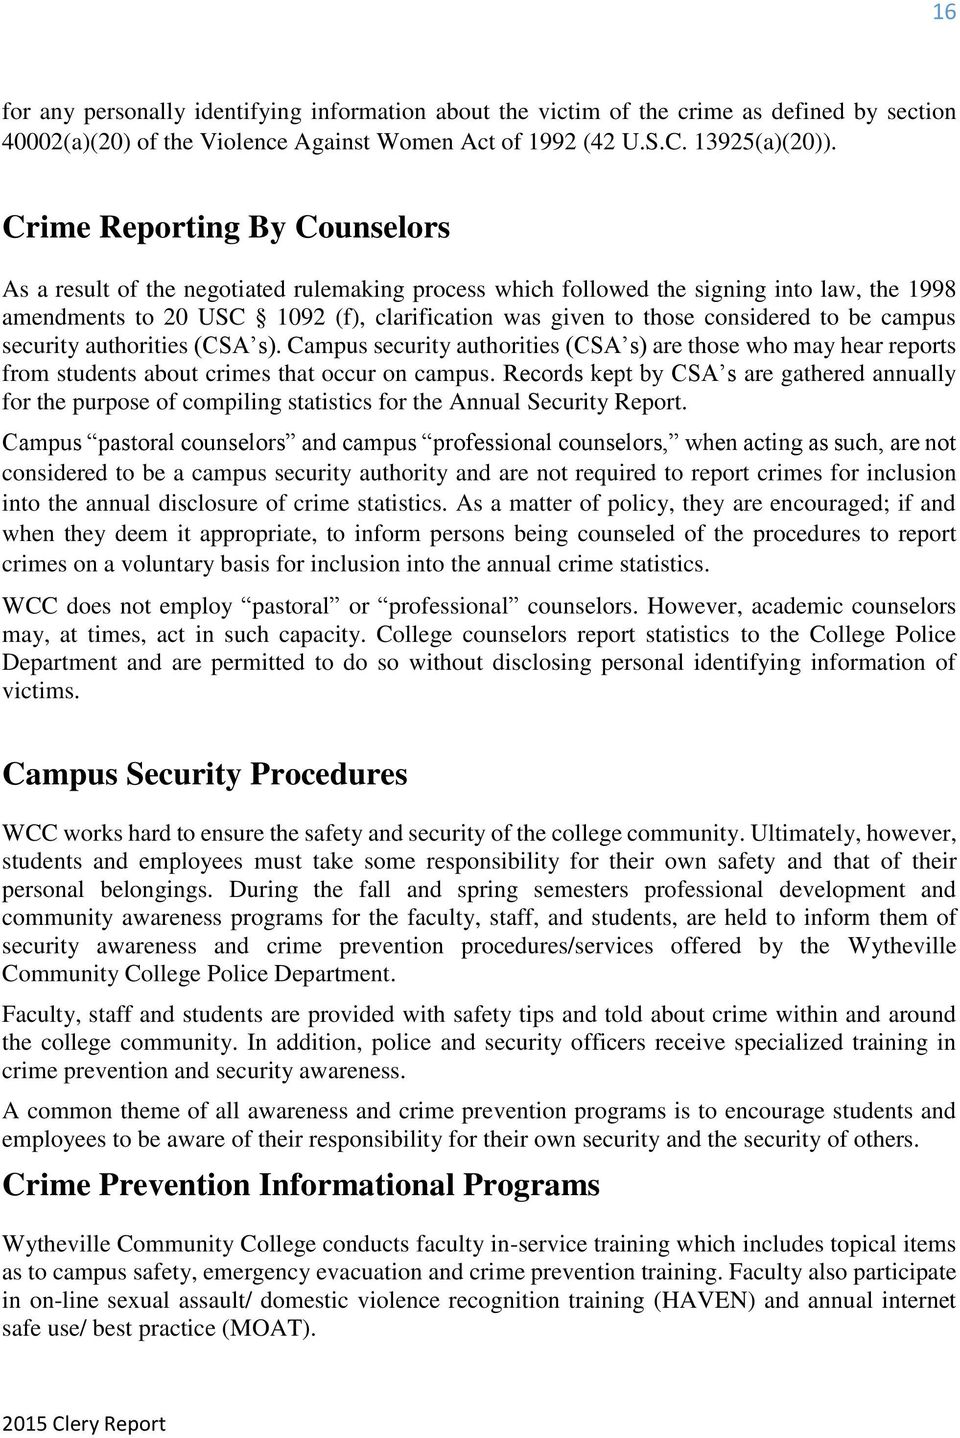 to be campus security authorities (CSA s). Campus security authorities (CSA s) are those who may hear reports from students about crimes that occur on campus.